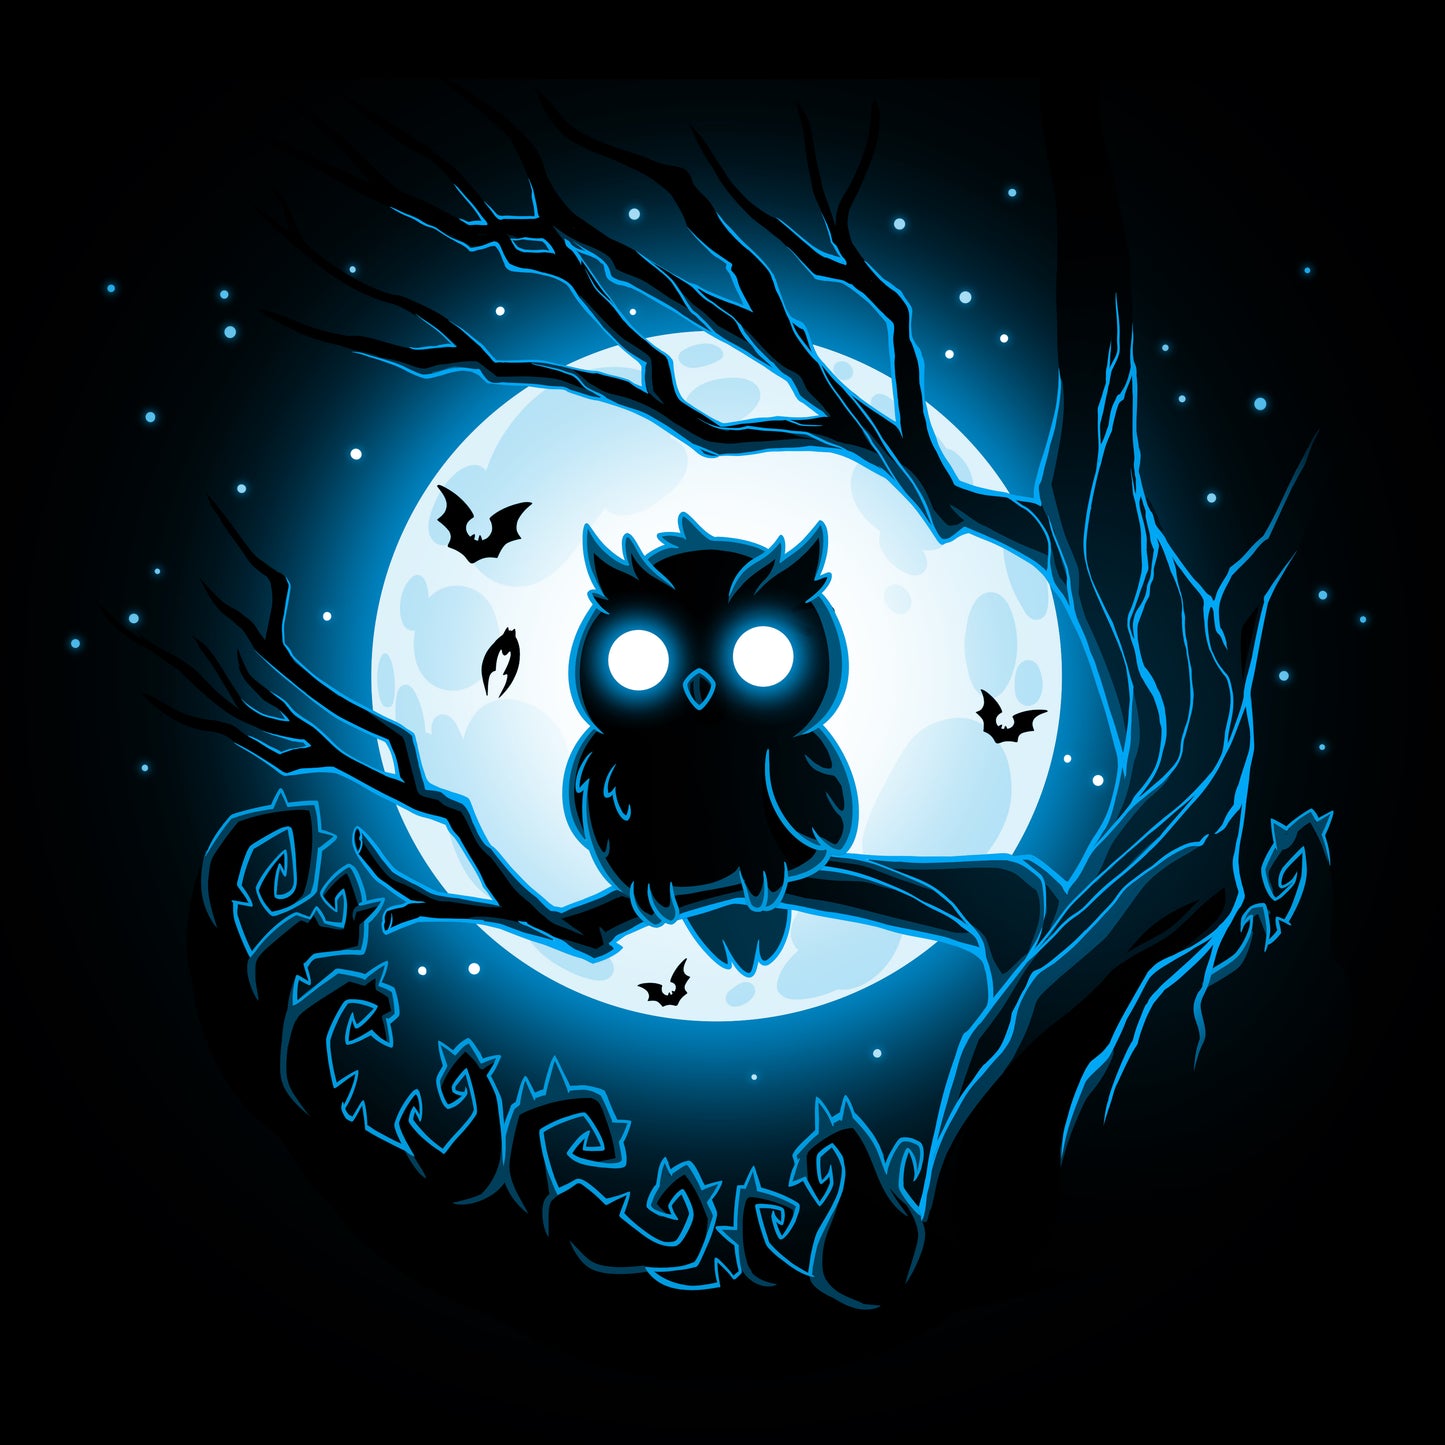 A Moonlit Owl, branded by TeeTurtle, perched on a tree in the moonlight, surrounded by a forest.